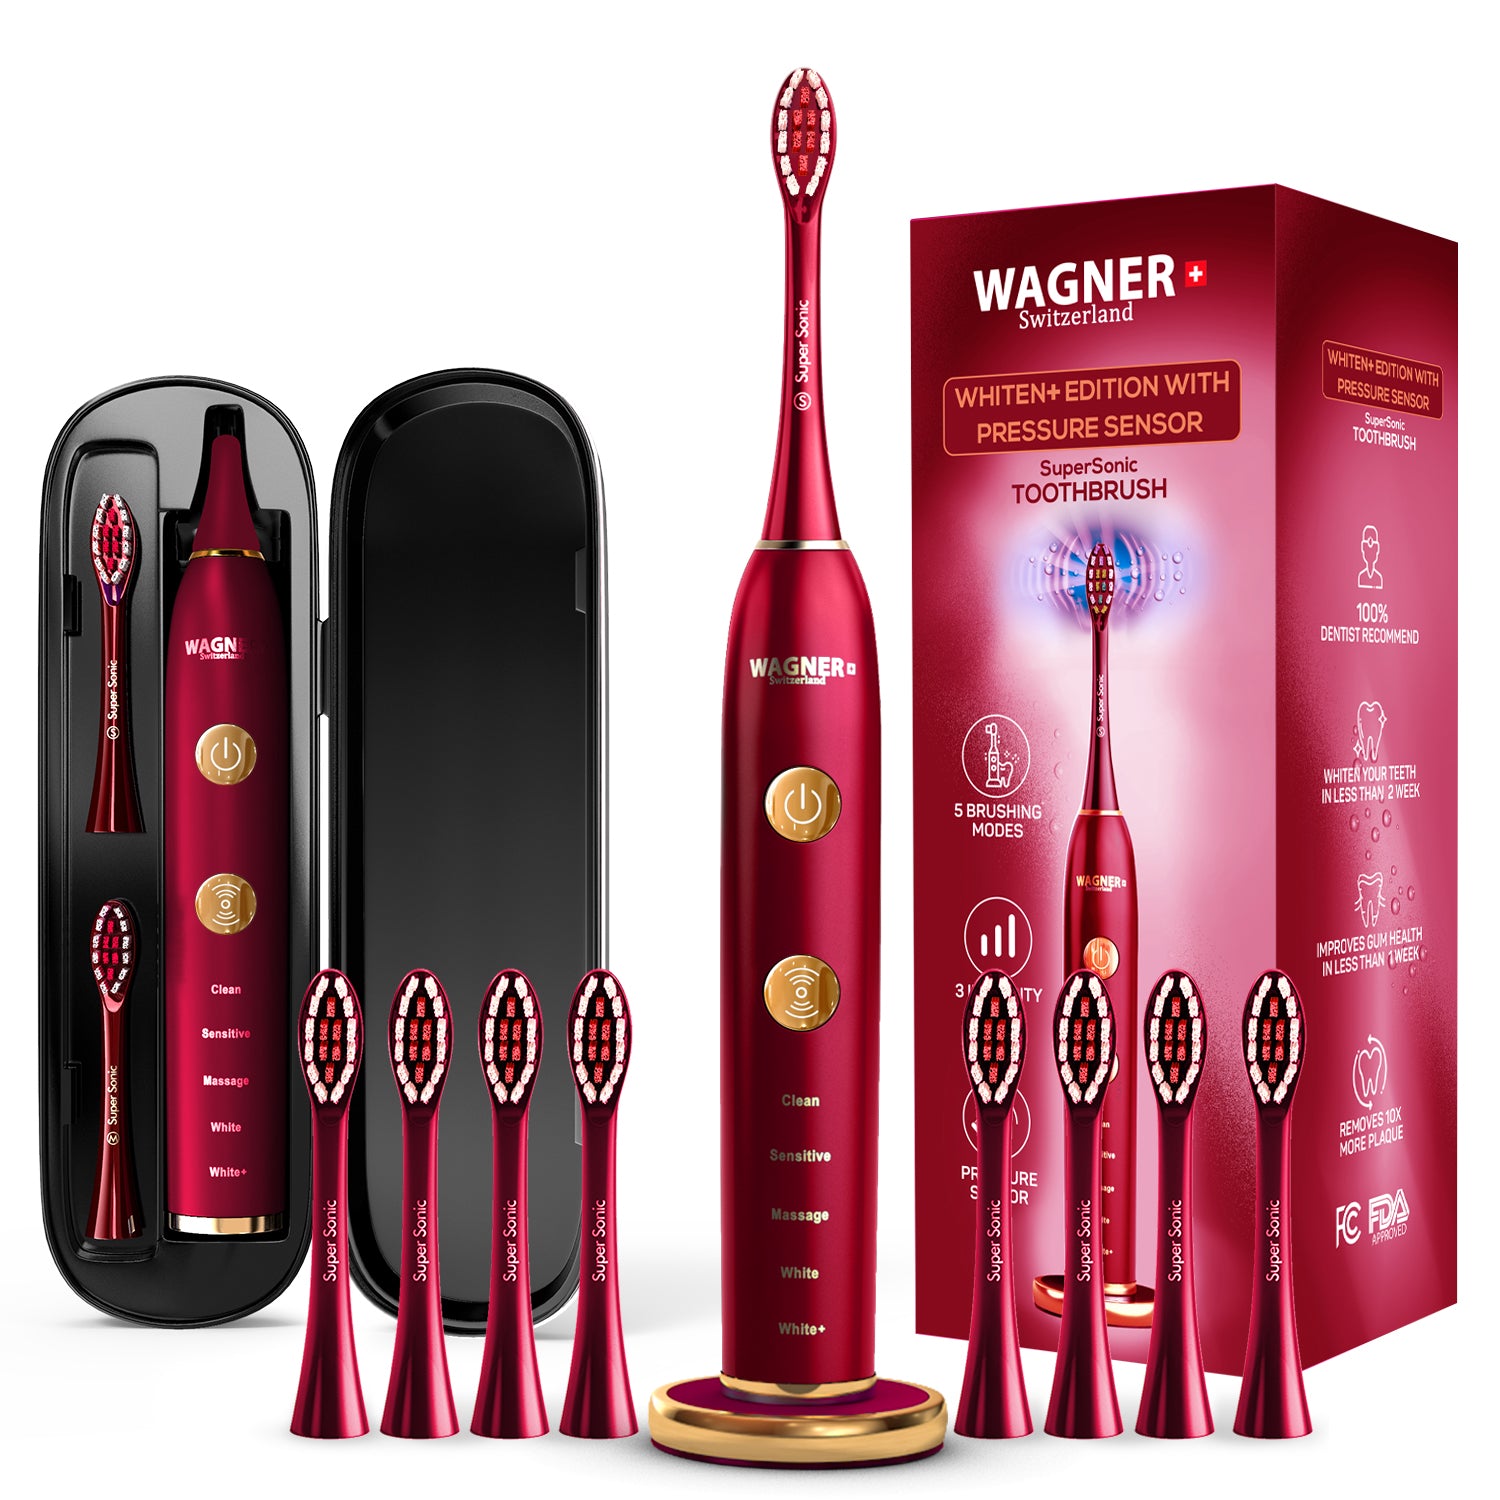 Replacement Toothbrush Brush Heads for Wagner & Stern and Wagner Switzerland toothbrushes.Whiten+ Edition, WT8800 Series and Duette series only. (Burgundy)